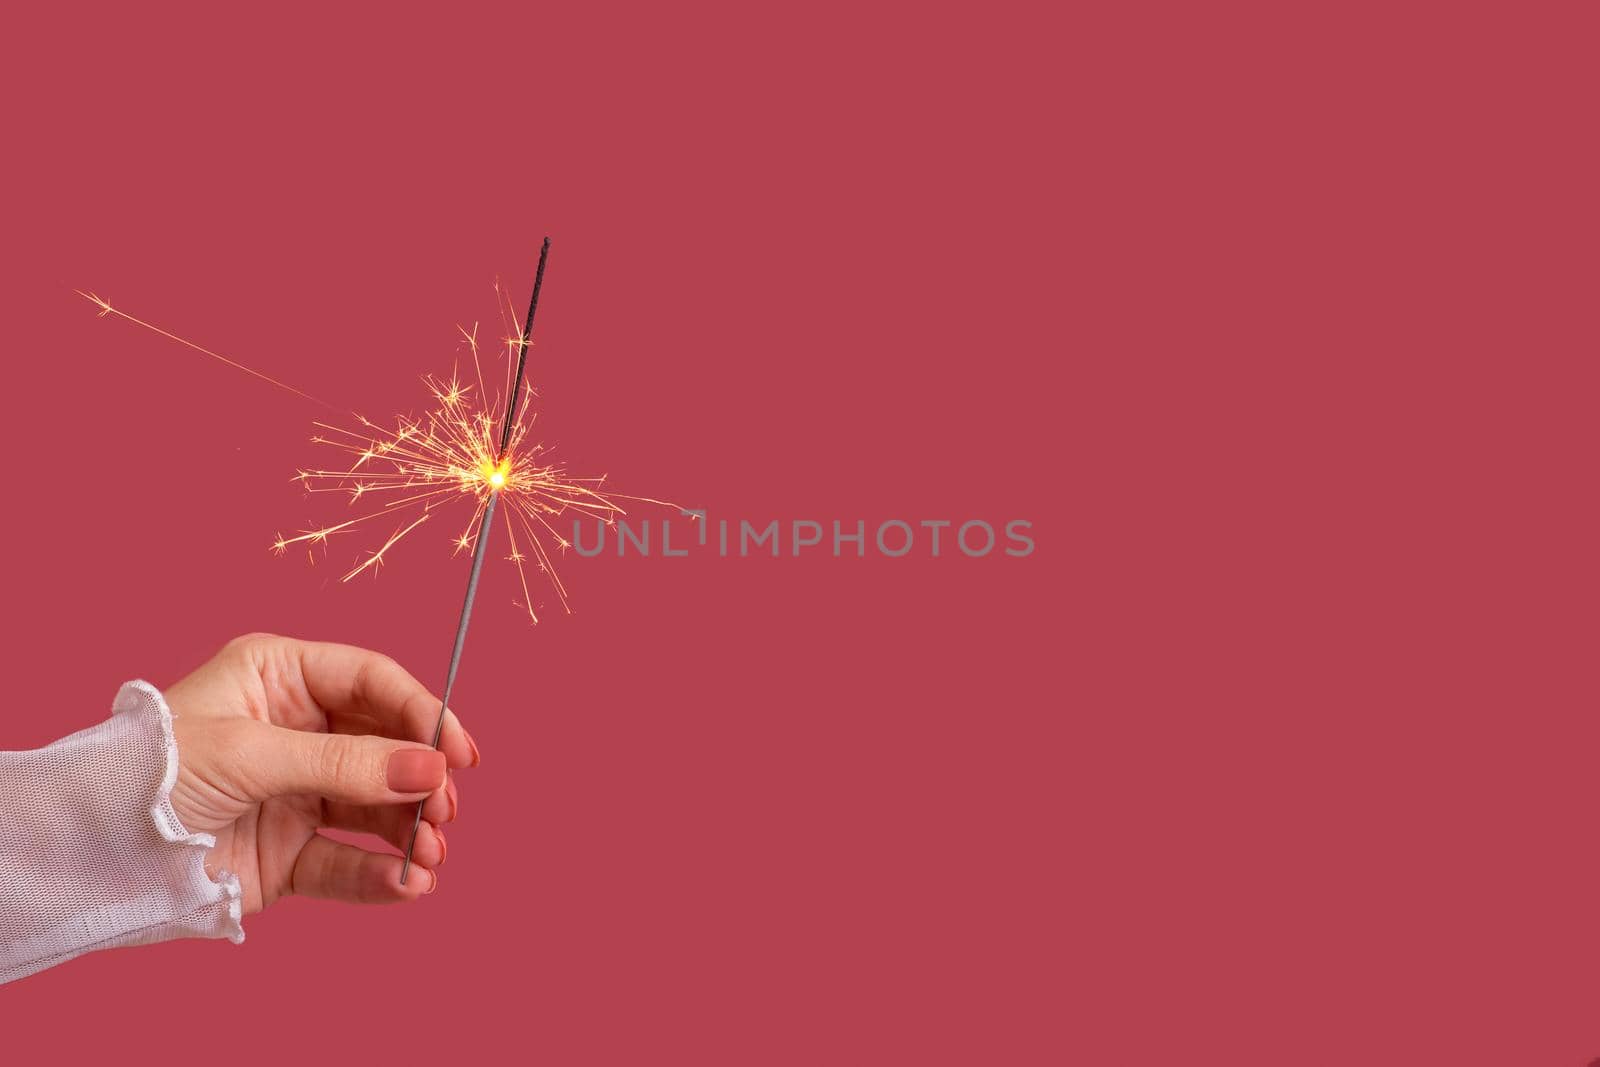 Bengal fire in female hand on a colored background. Minimalistic christmas festive concept with copy space by ssvimaliss